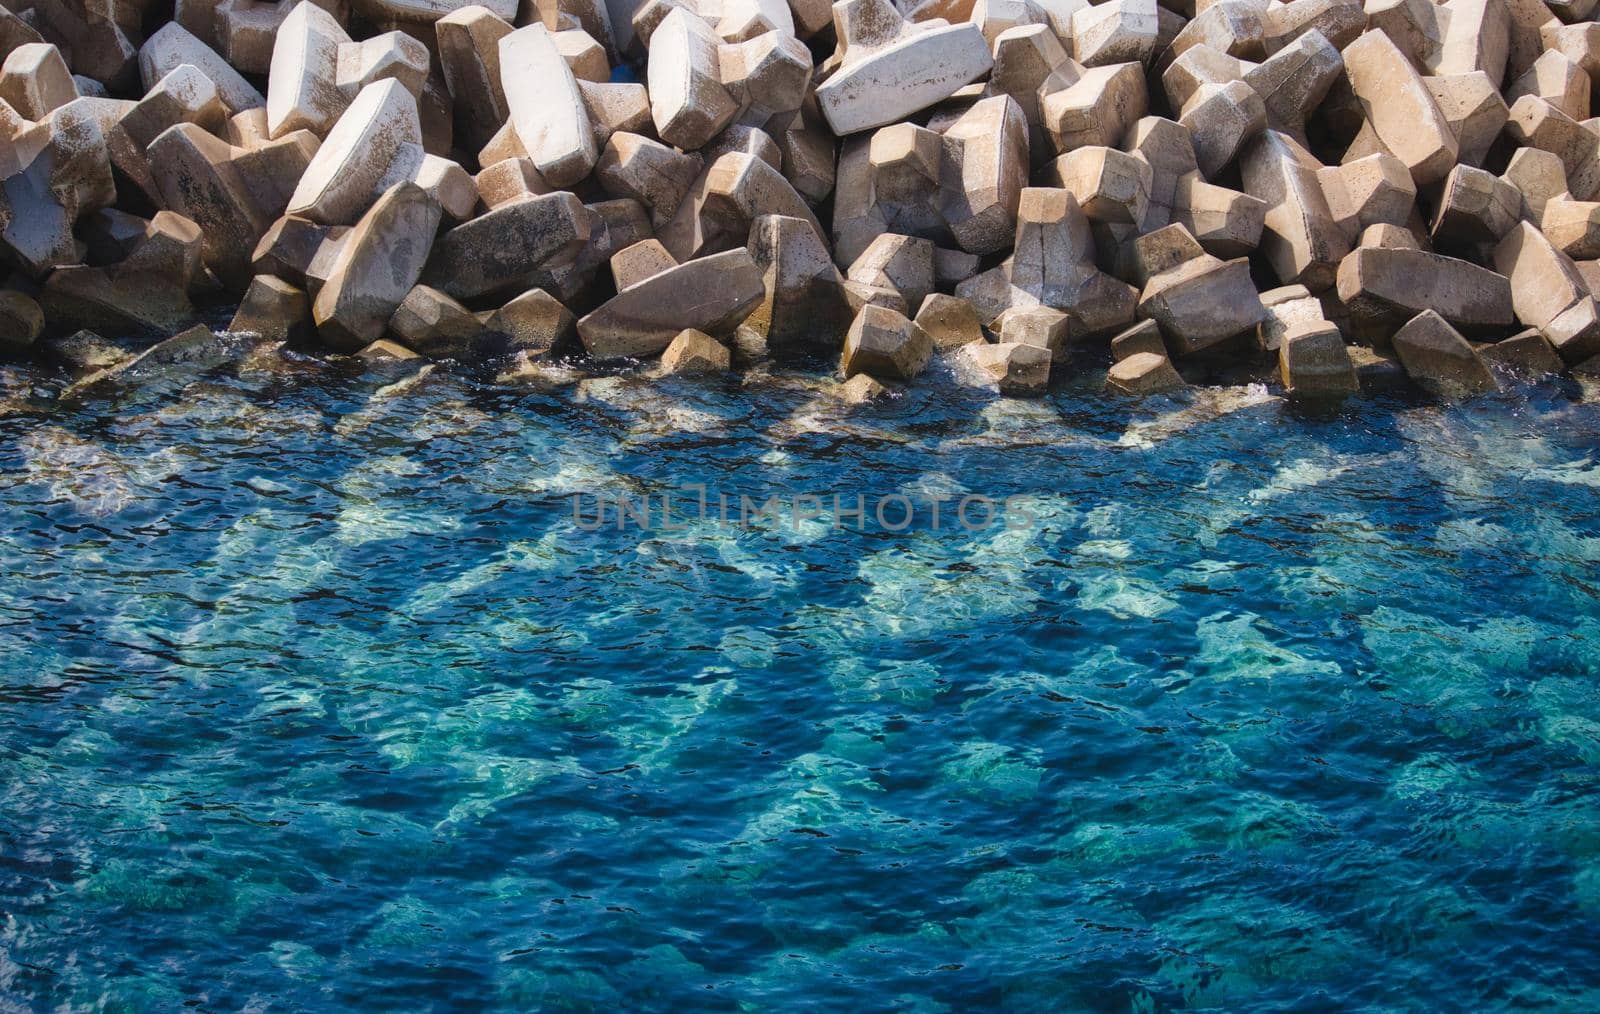 Textured background of clear blue sea and white stone tetrapods used to prevent erosion